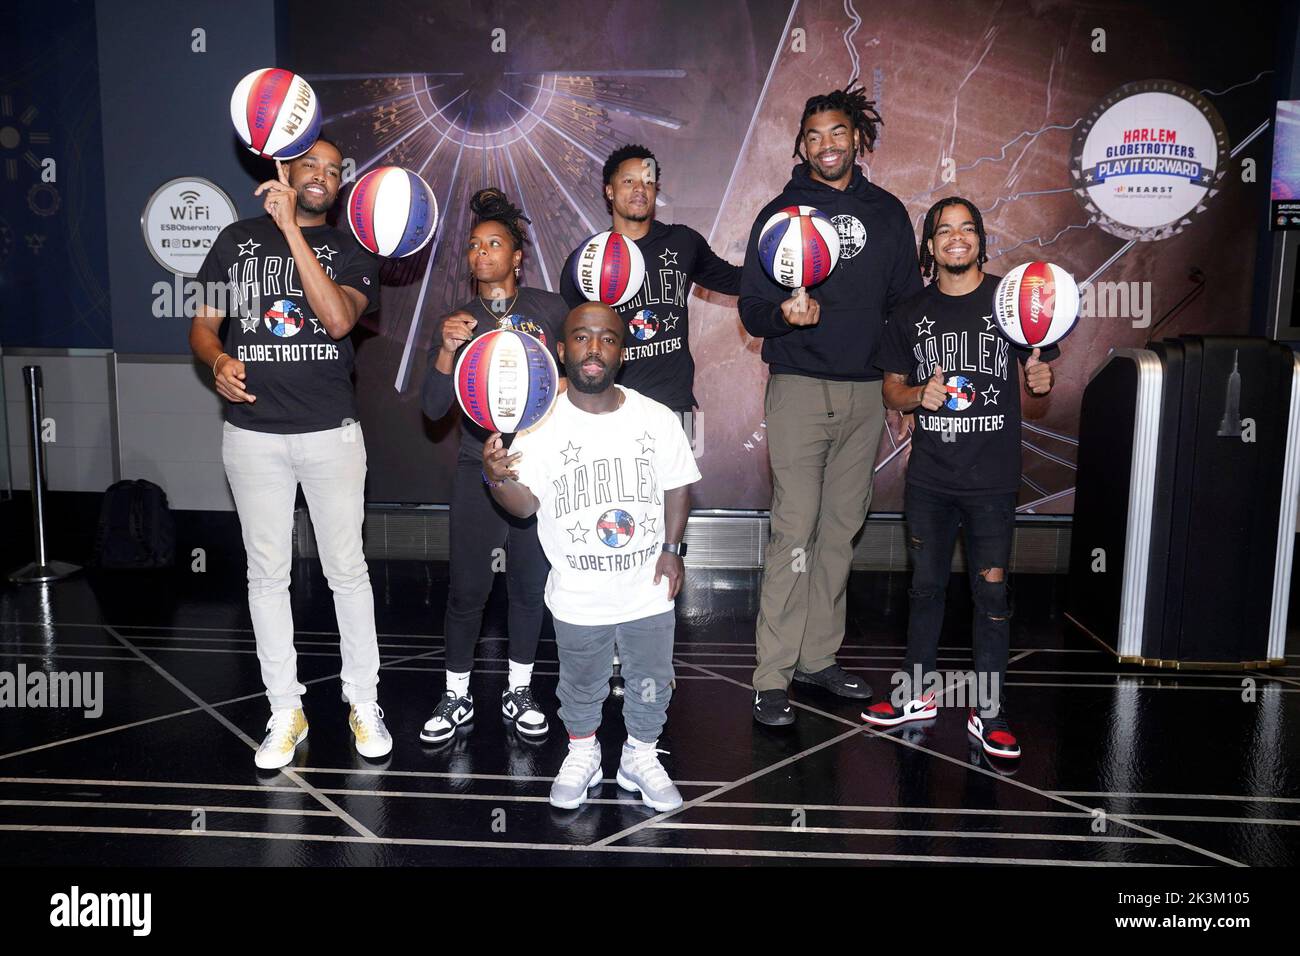 New York, NY, USA. 27th Sep, 2022. The Harlem Globetrotters at a public appearance for HARLEM GLOBETROTTERS: PLAY IT FORWARD Screening, The Empire State Building, New York, NY September 27, 2022. Credit: Eli Winston/Everett Collection/Alamy Live News Stock Photo